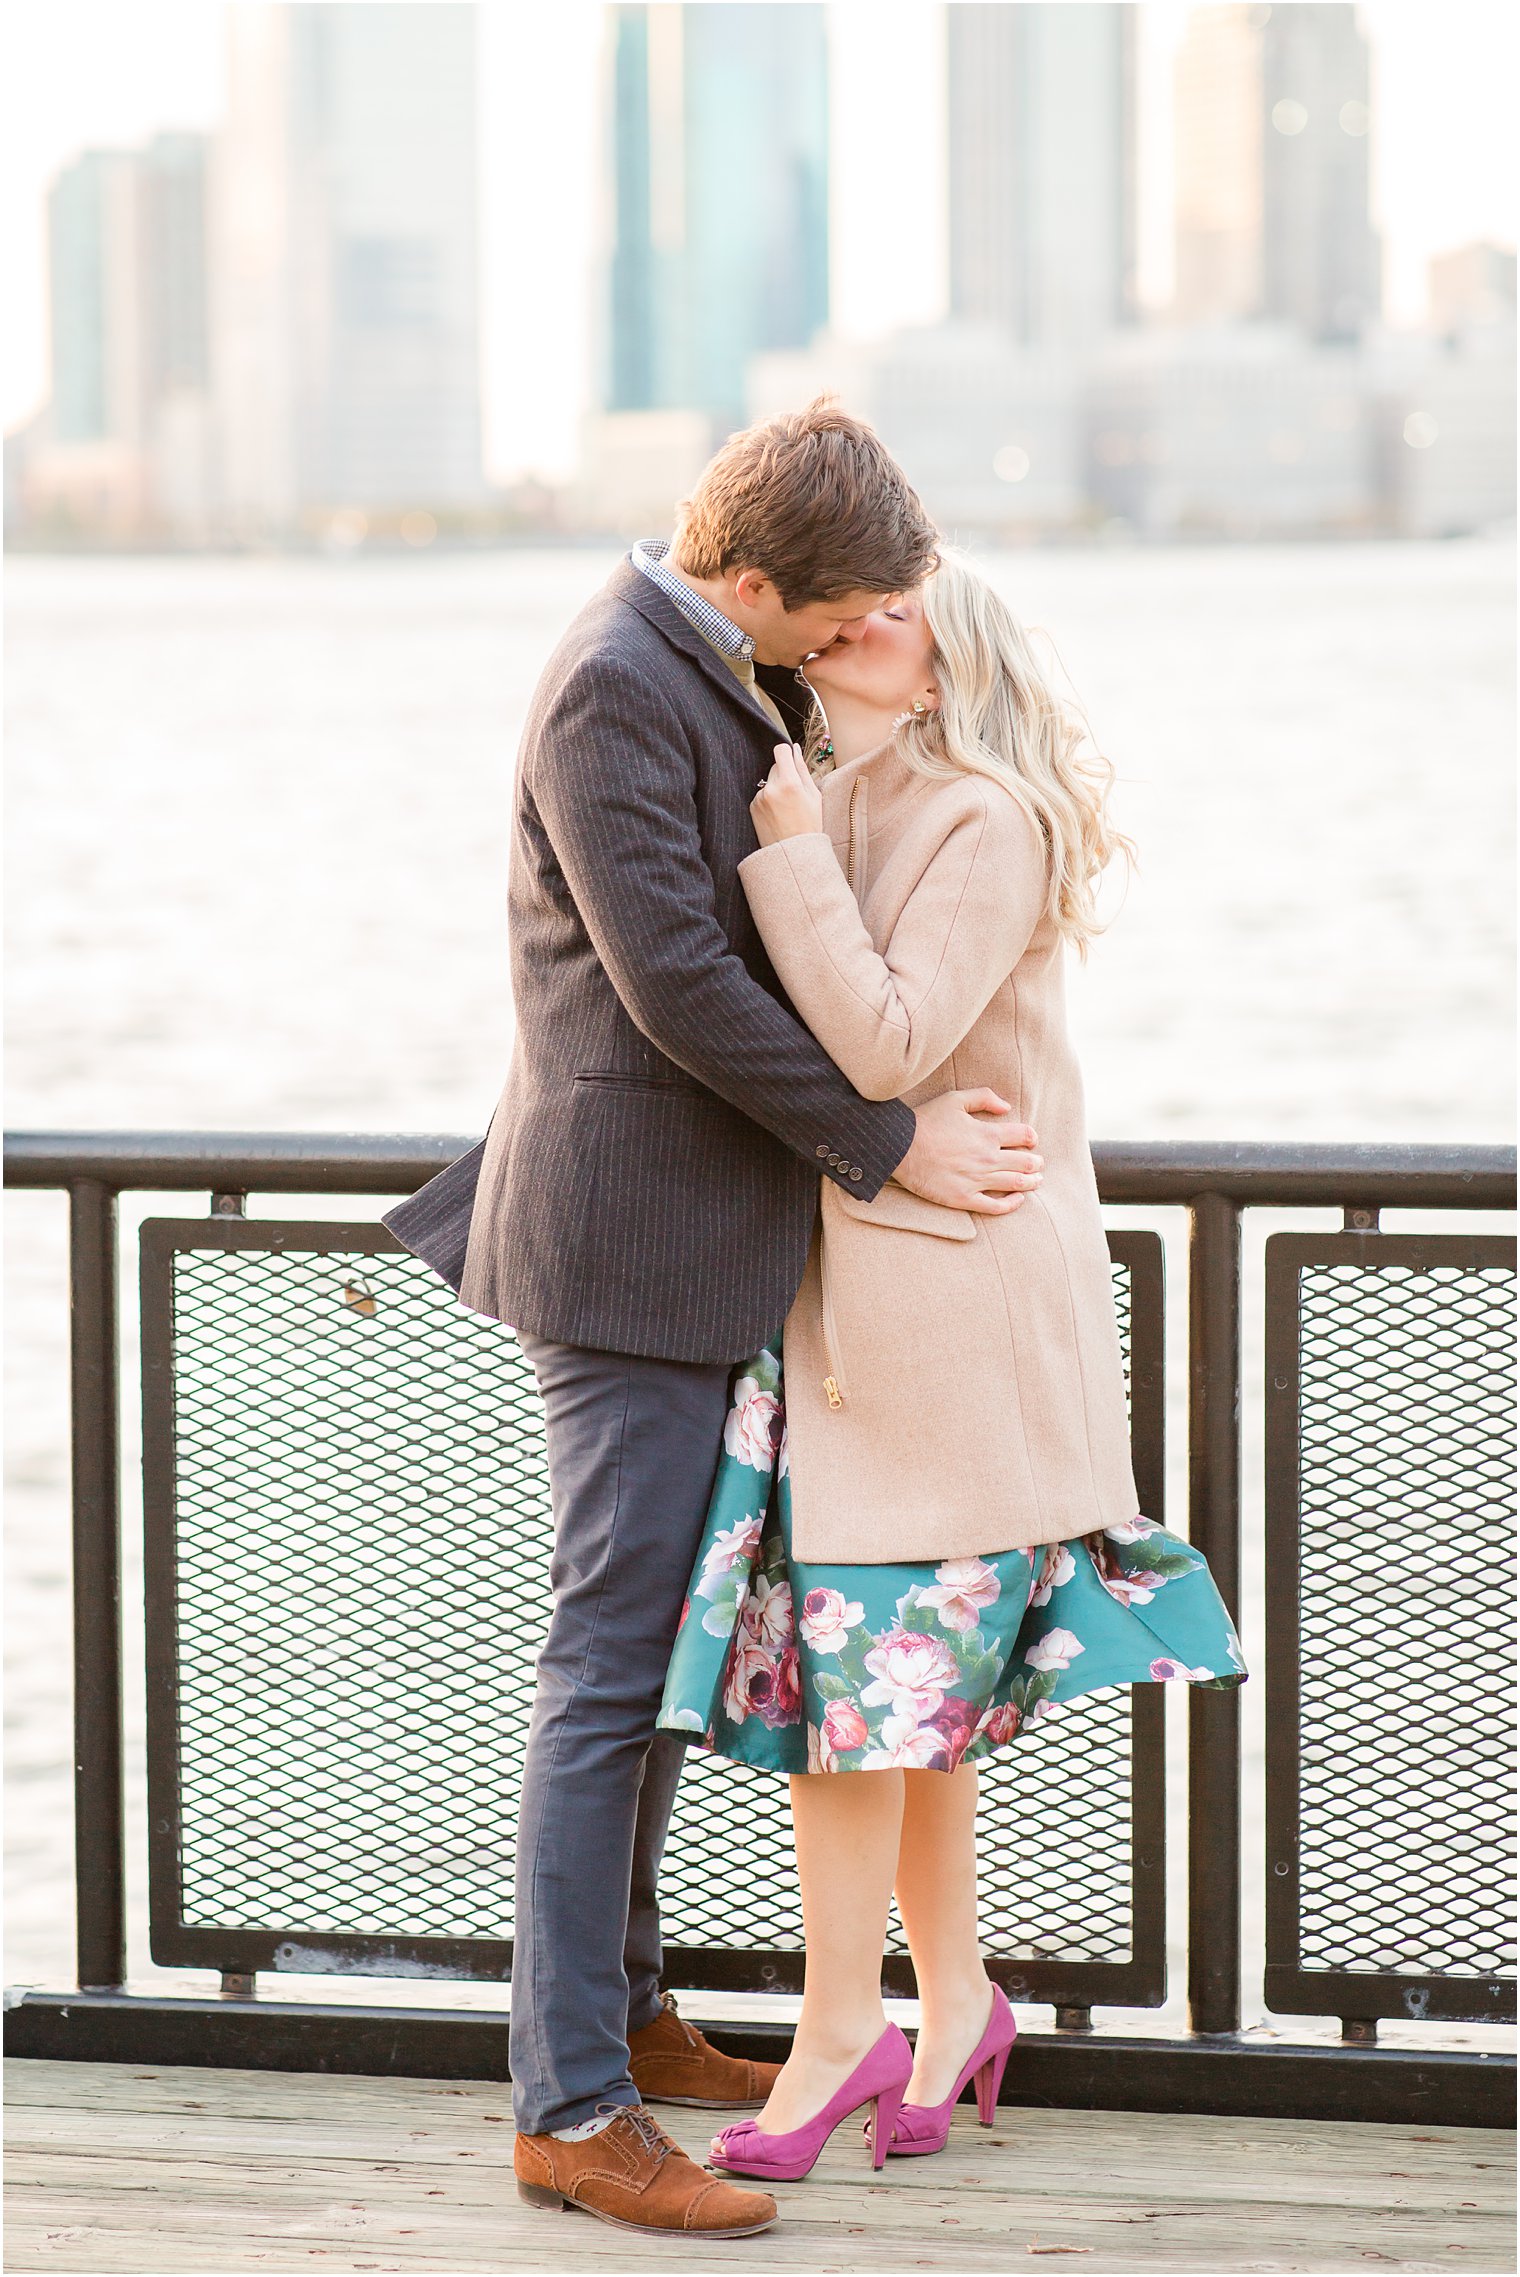 engagement photo in Battery Park City